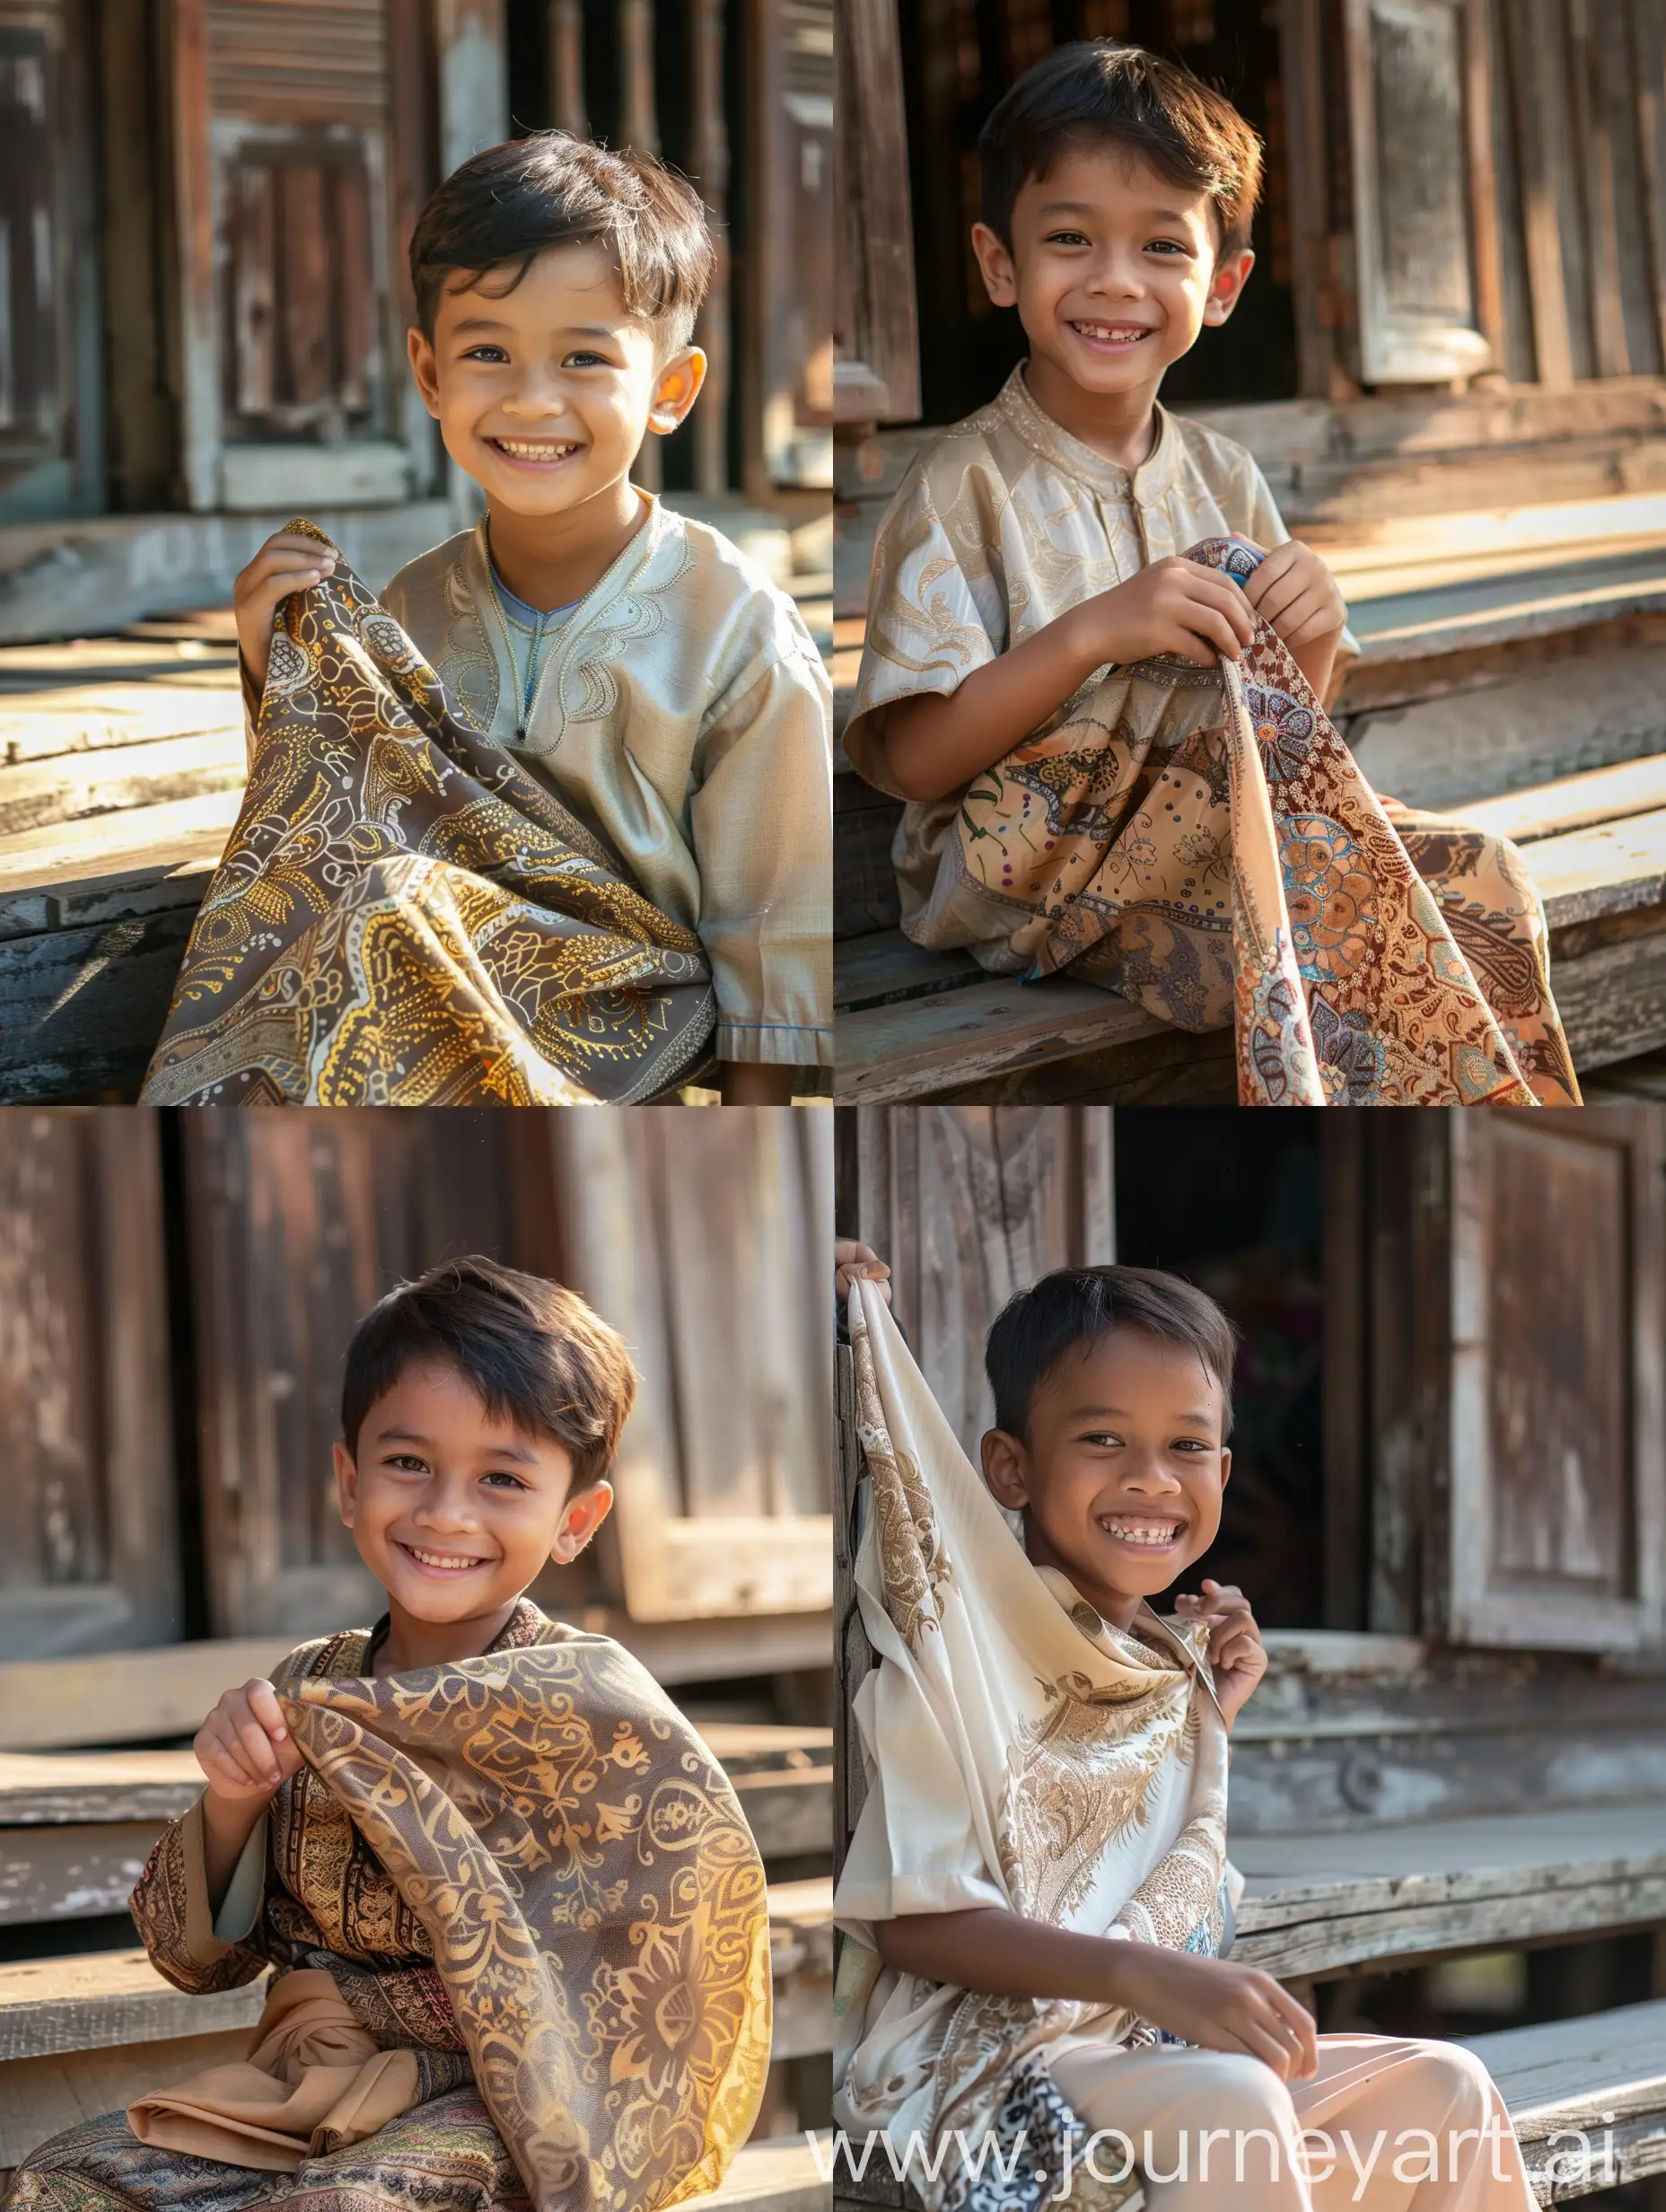 close up. Malay boy sitting on the steps of a wooden house smiling. wearing Malay clothes and sarong cloth. his left hand held the sarong he was wearing while lifting it slightly up. classic malay house background. there is sunlight